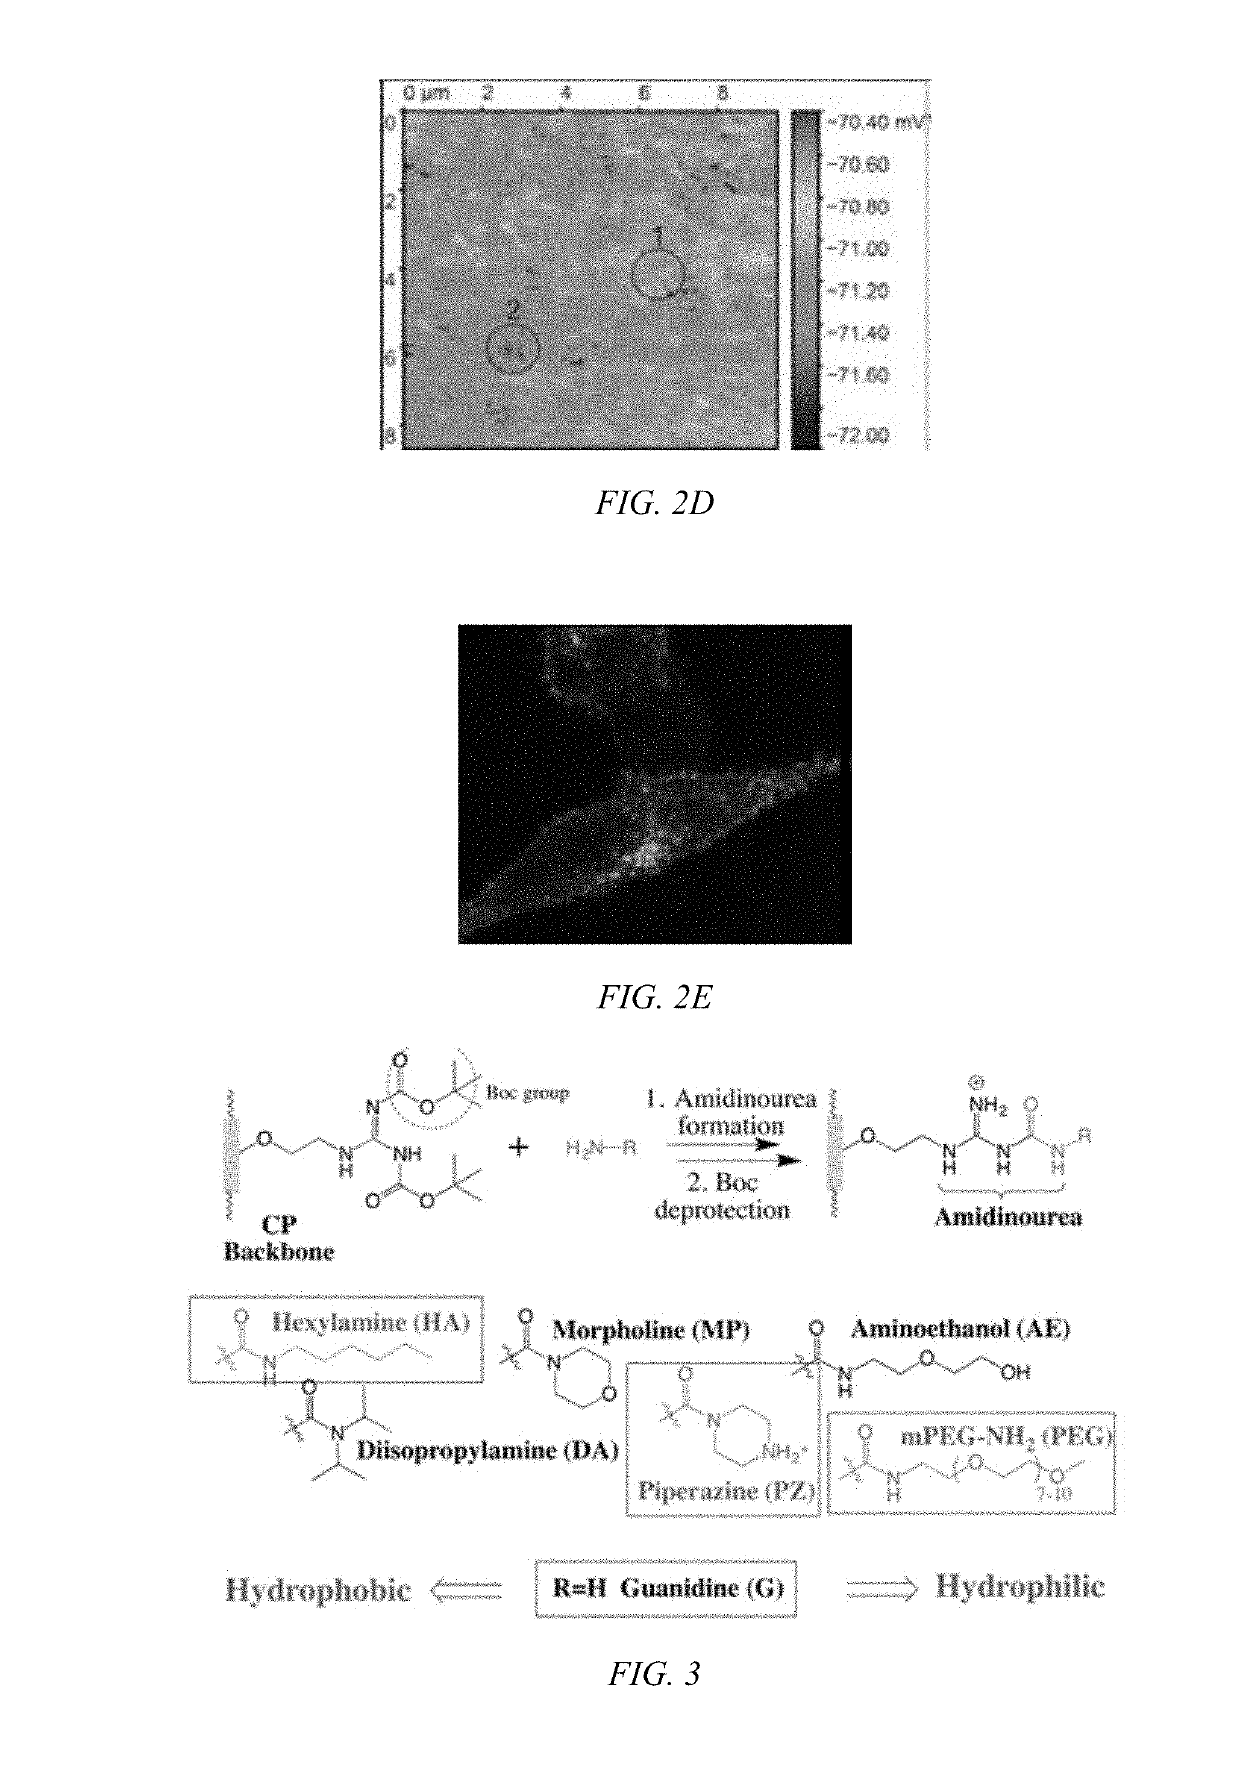 Modulated guanidine-containing polymers or nanoparticles